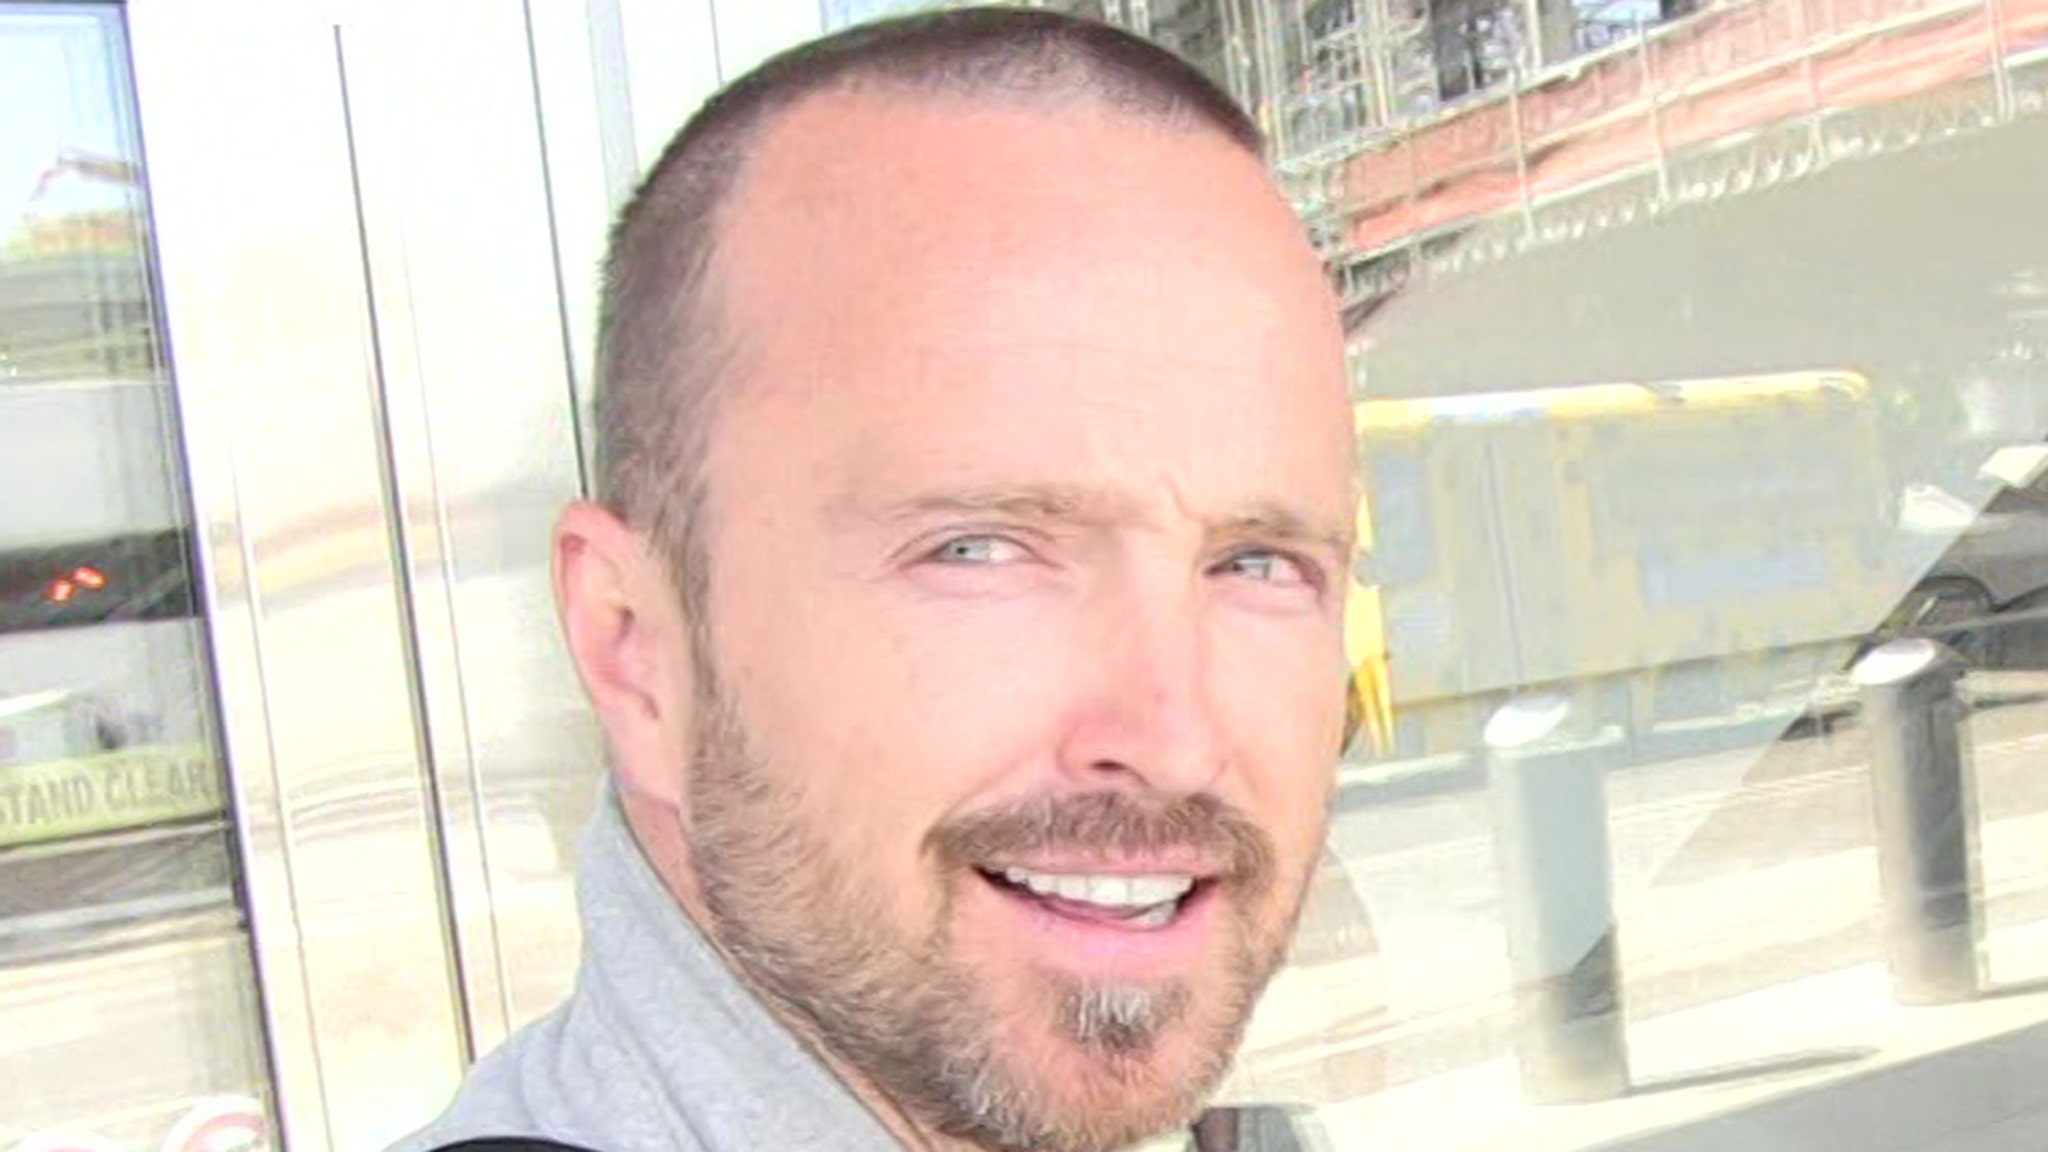 Aaron Paul Officially Gets His Name Changed with Petition, Whole Family Official